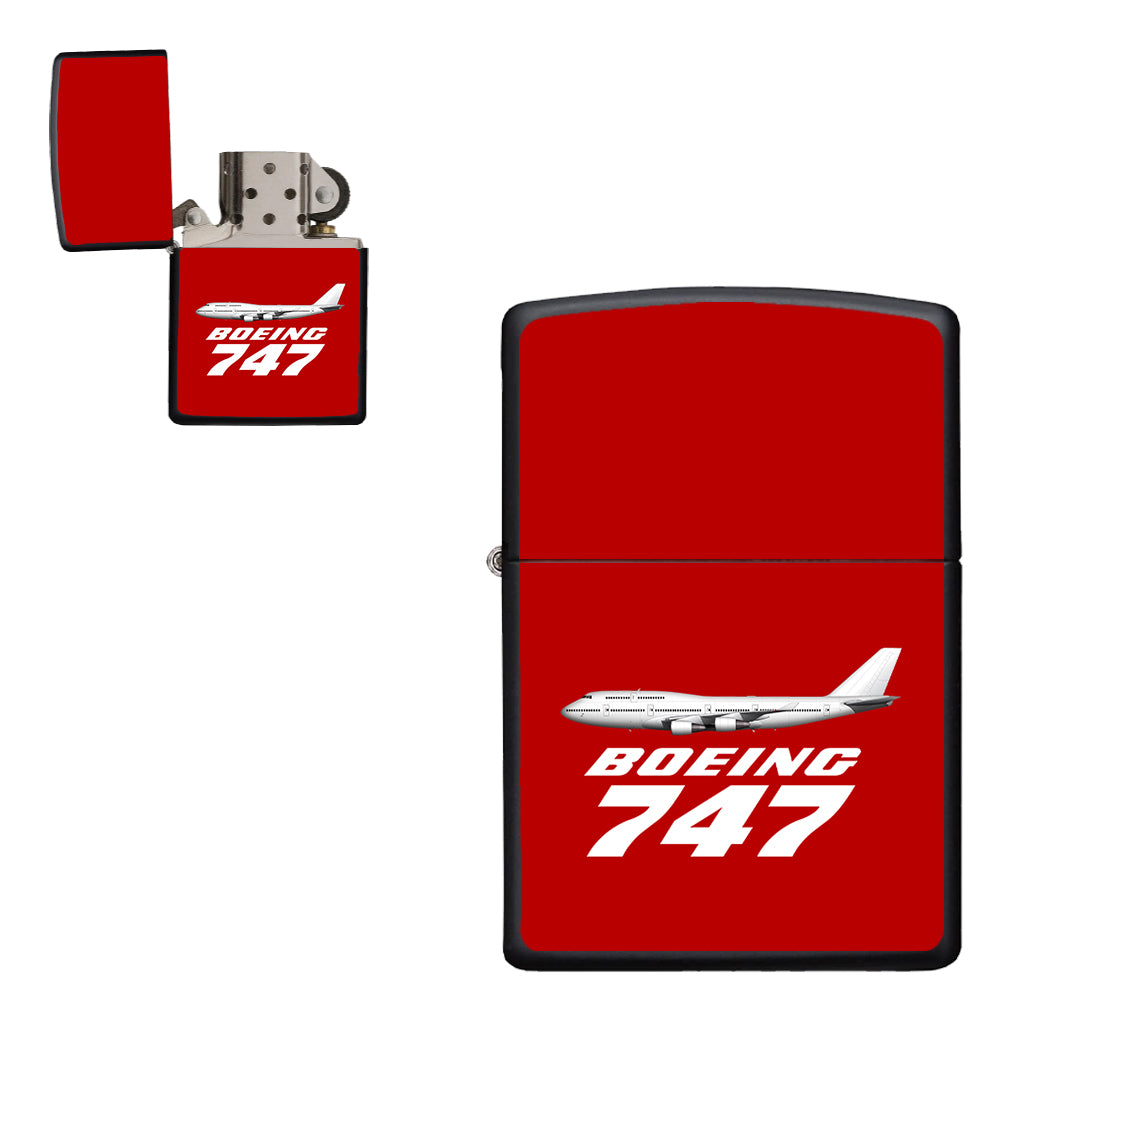 The Boeing 747 Designed Metal Lighters